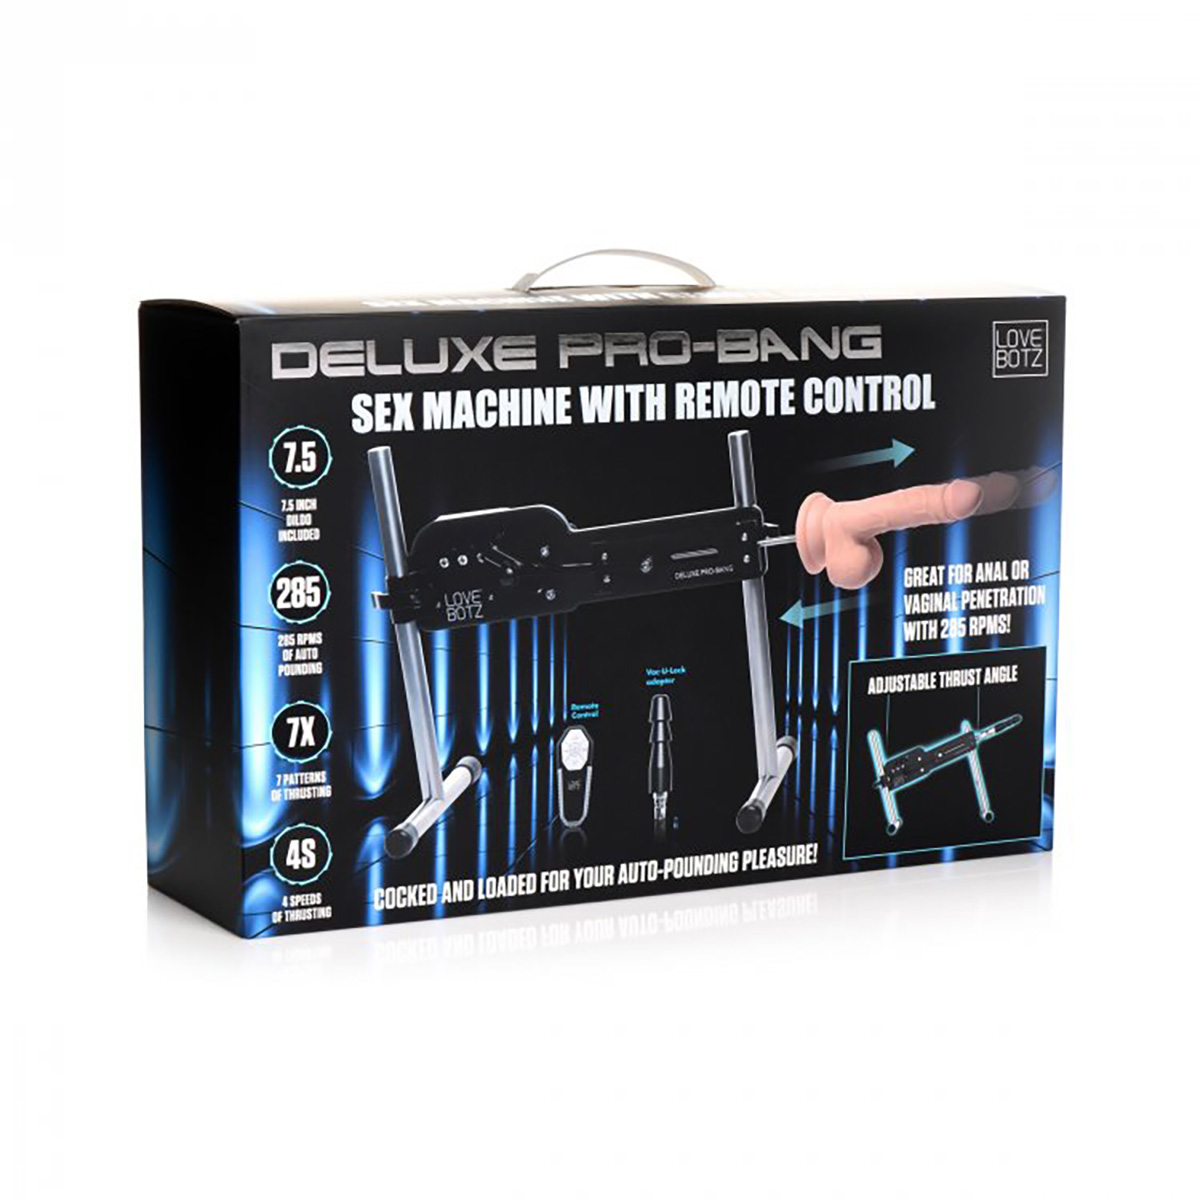 Deluxe-Pro-Bang-Sex-Machine-w-Remote-Control-118-XR-AG806-6